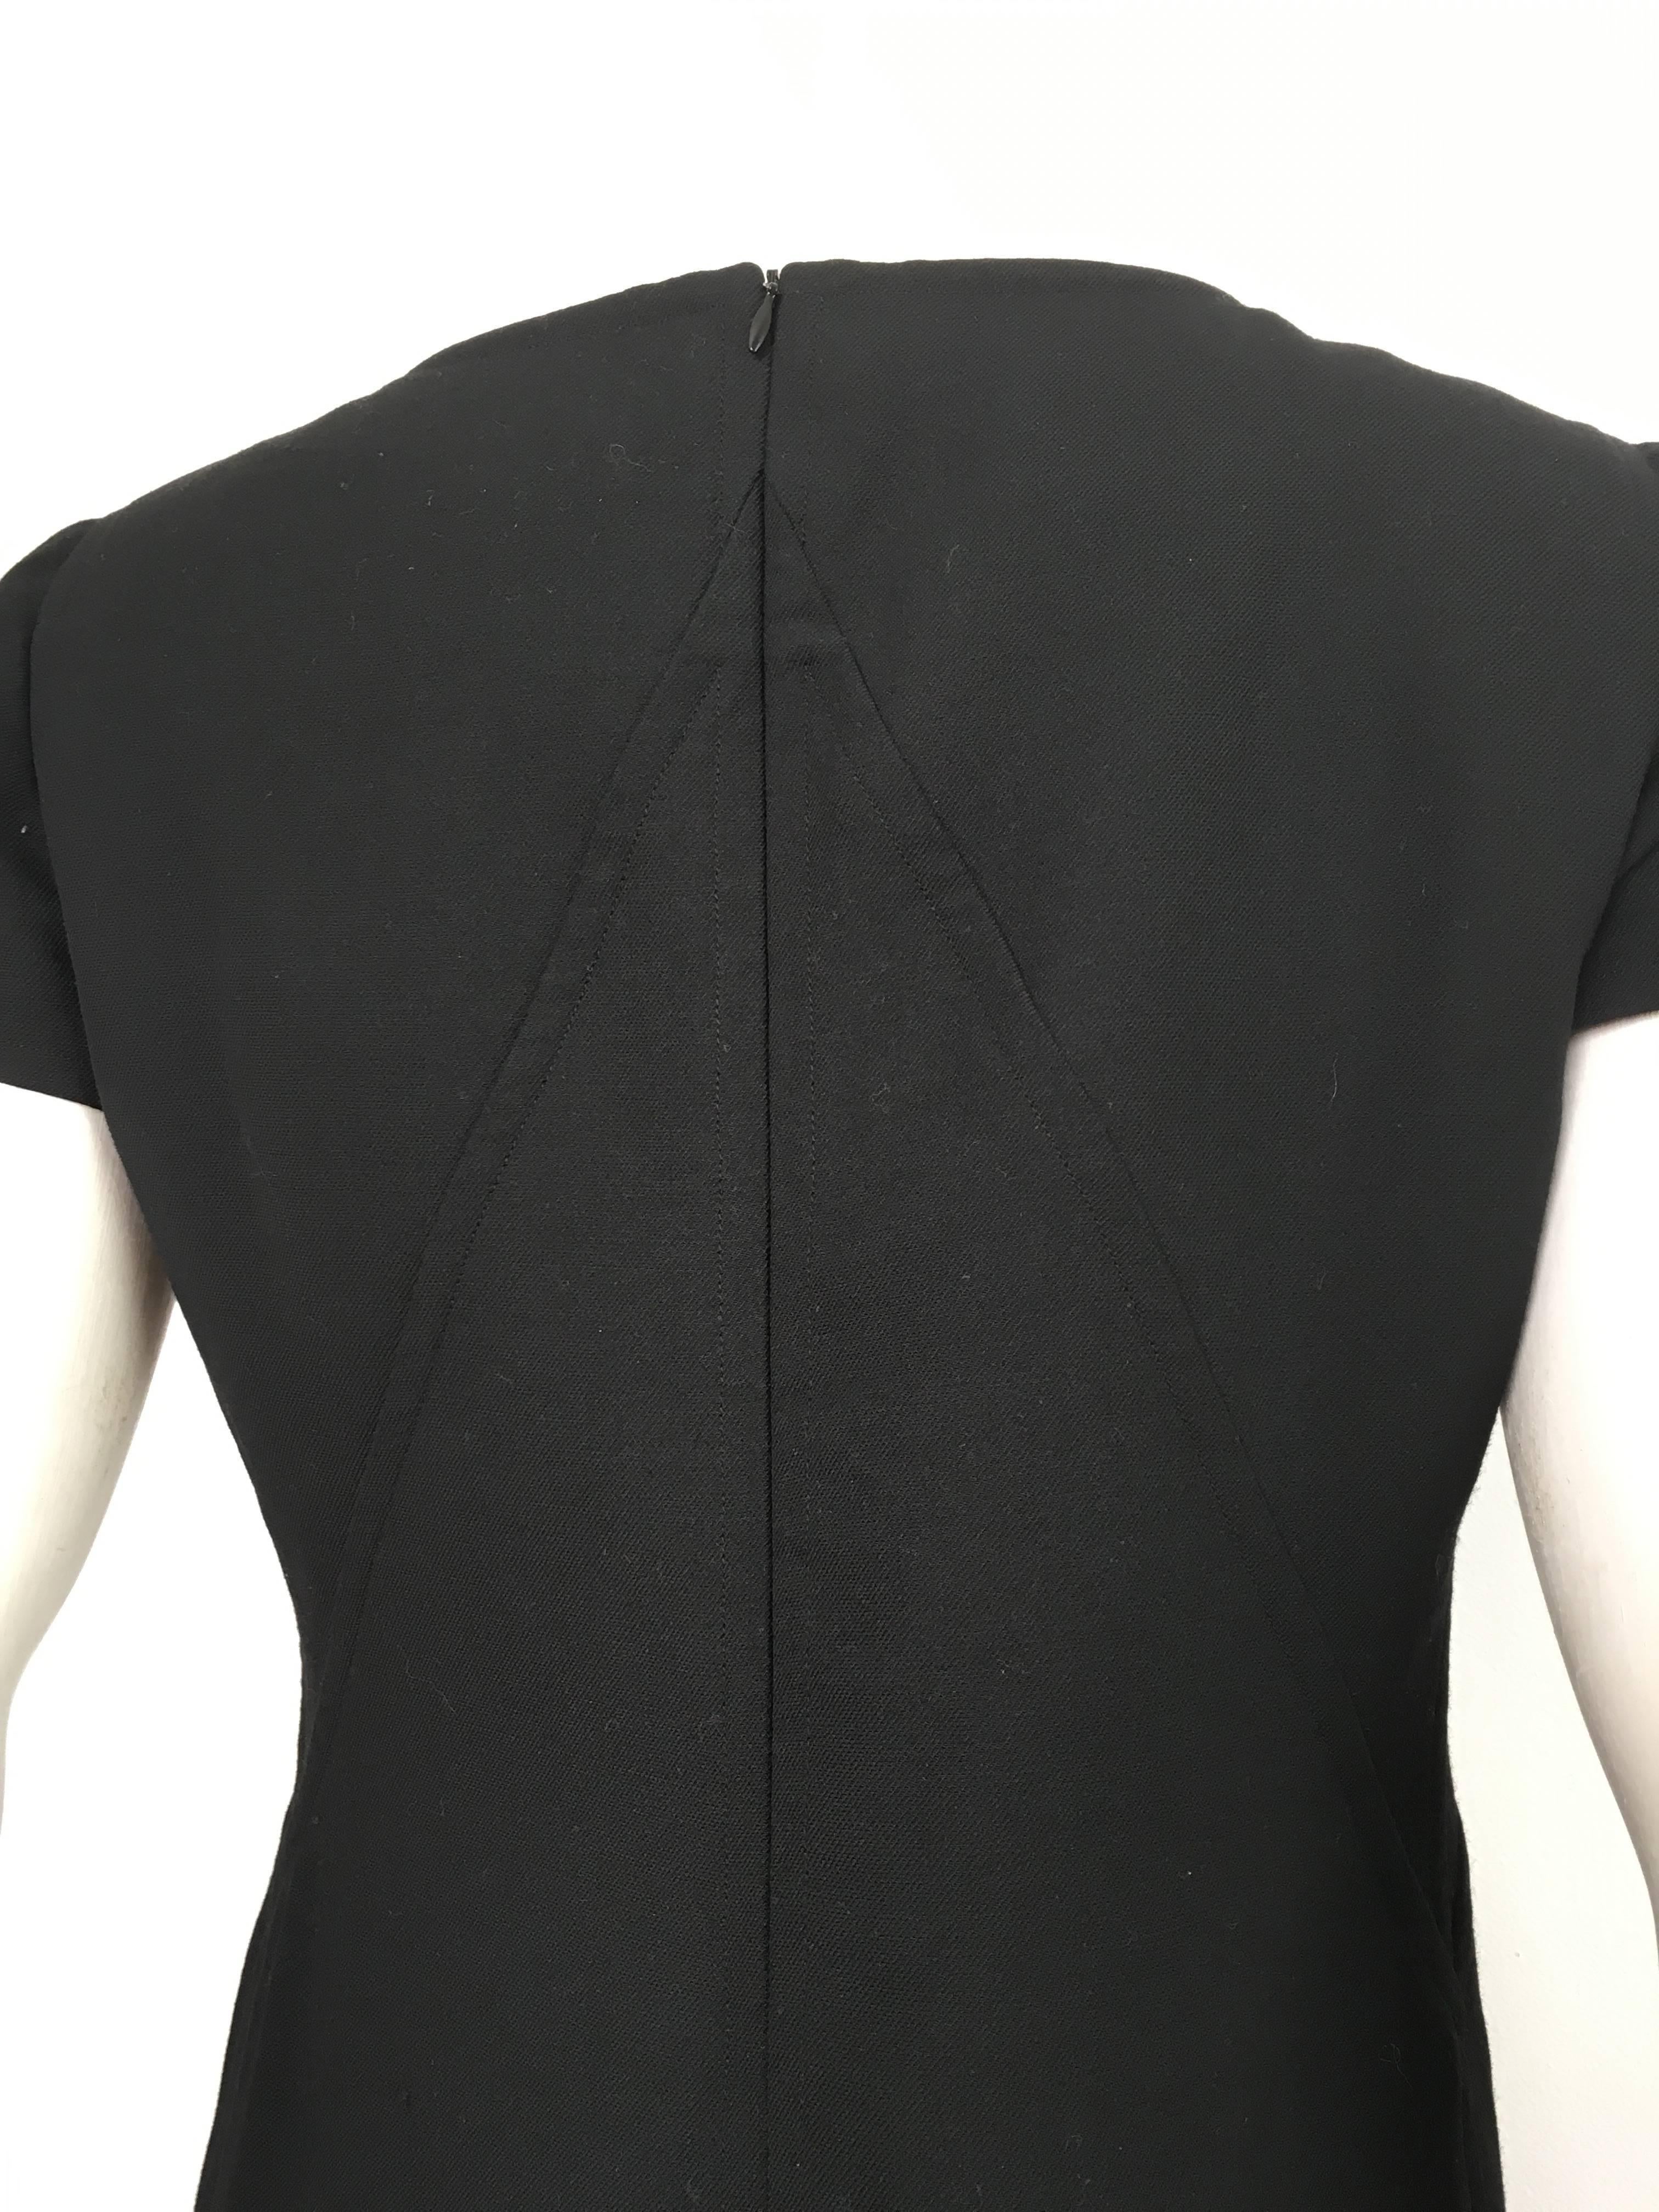 Courreges Black Wool Short Sleeve Dress with Pockets Size 8. 4